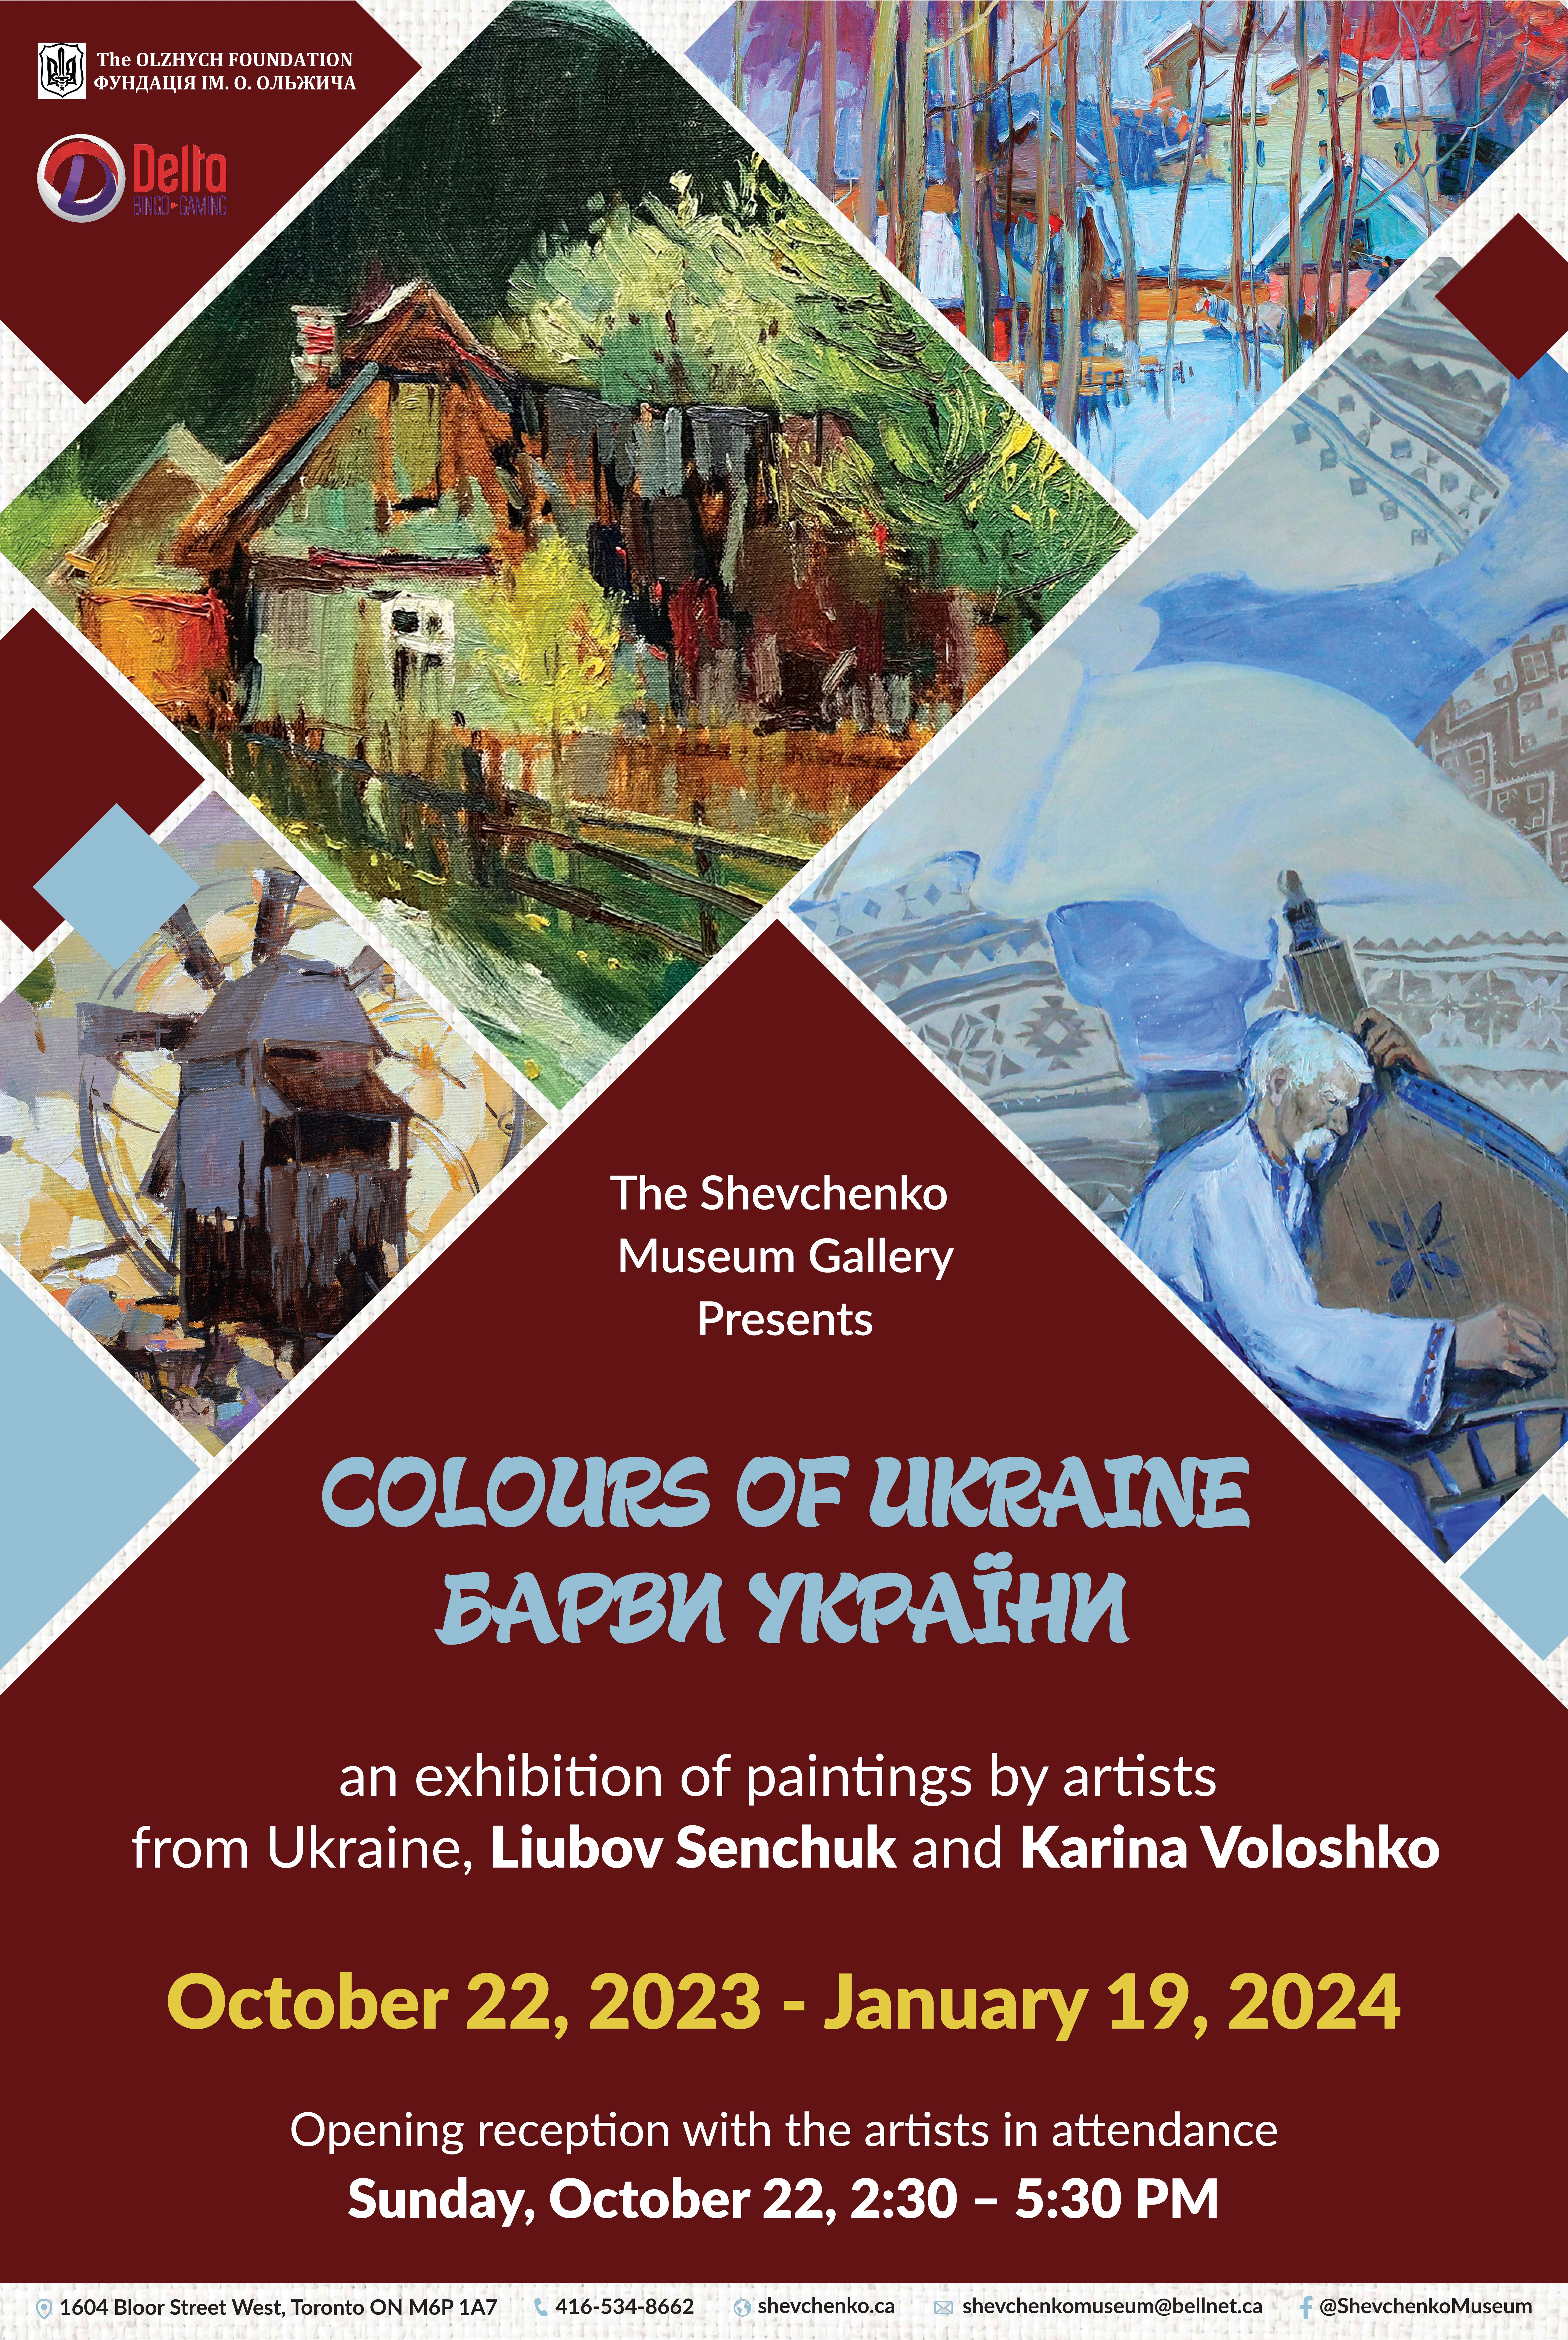 an exhibition and sale of paintings by artists from Ukraine,   Liubov Senchuk and Karina Voloshko